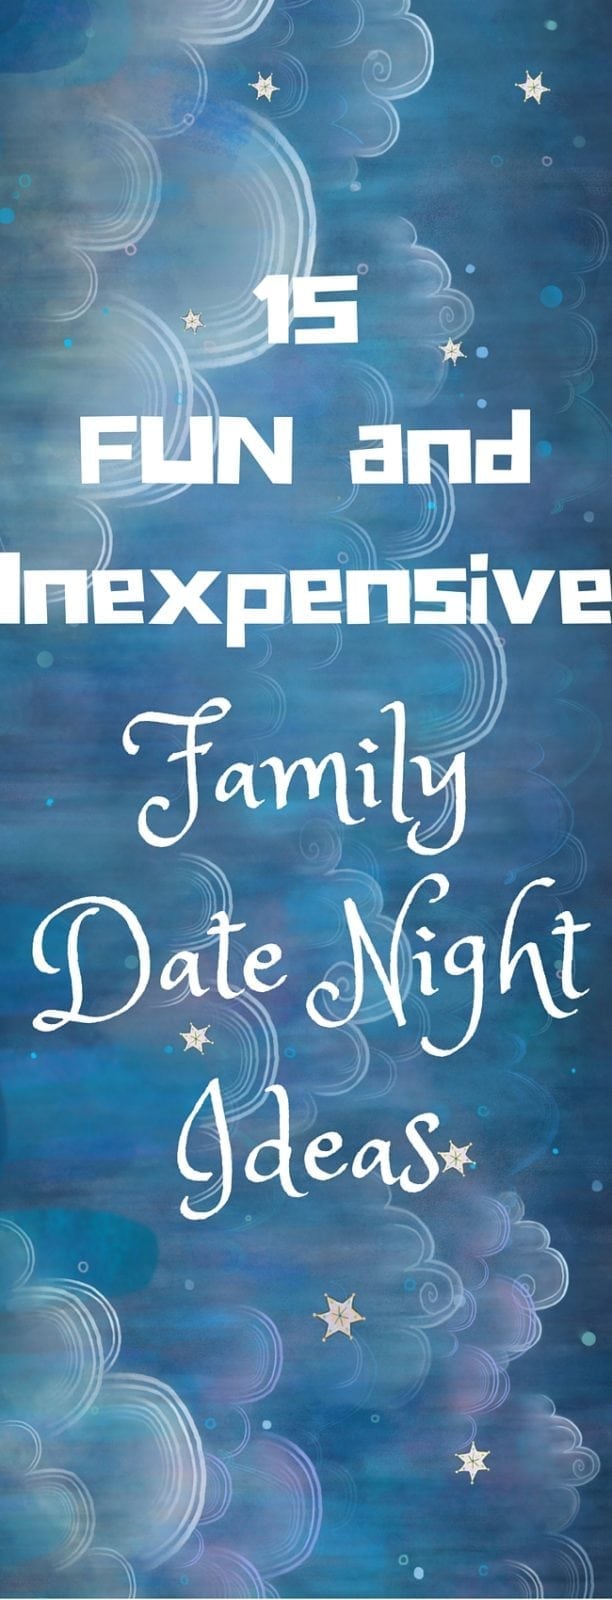 15 fun and inexpensive date night ideas the WHOLE family will LOVE!